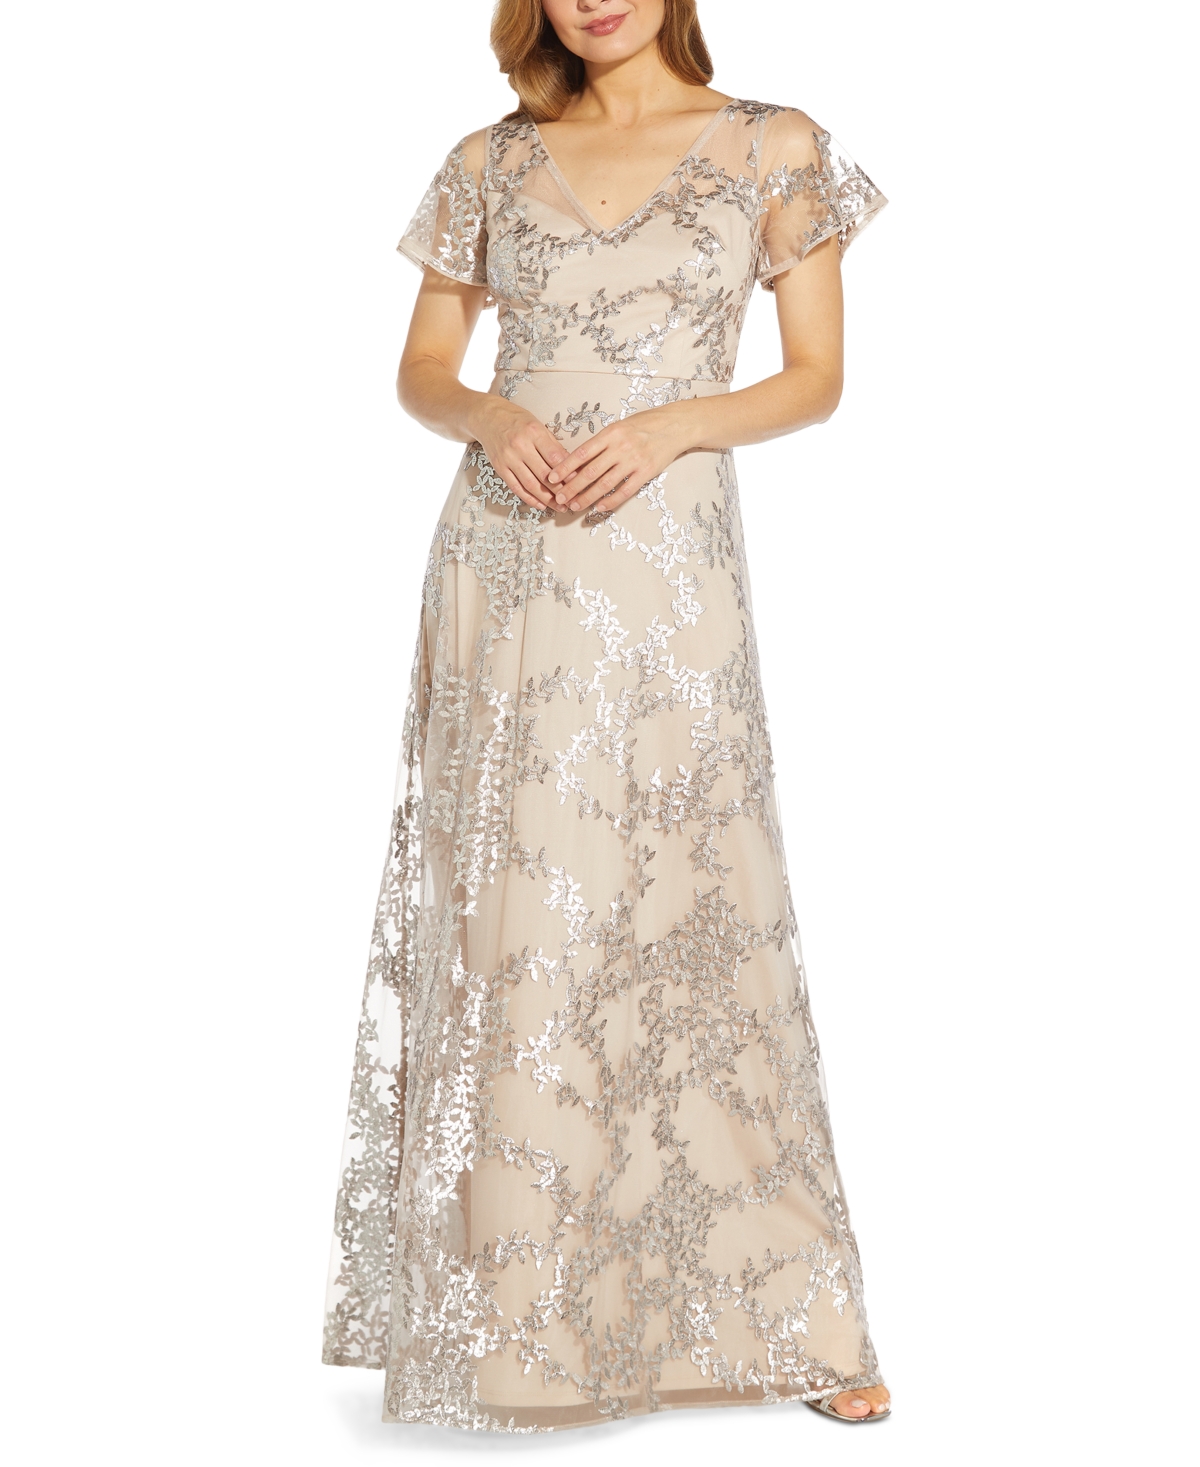 Adrianna Papell Metallic Embroidered Gown